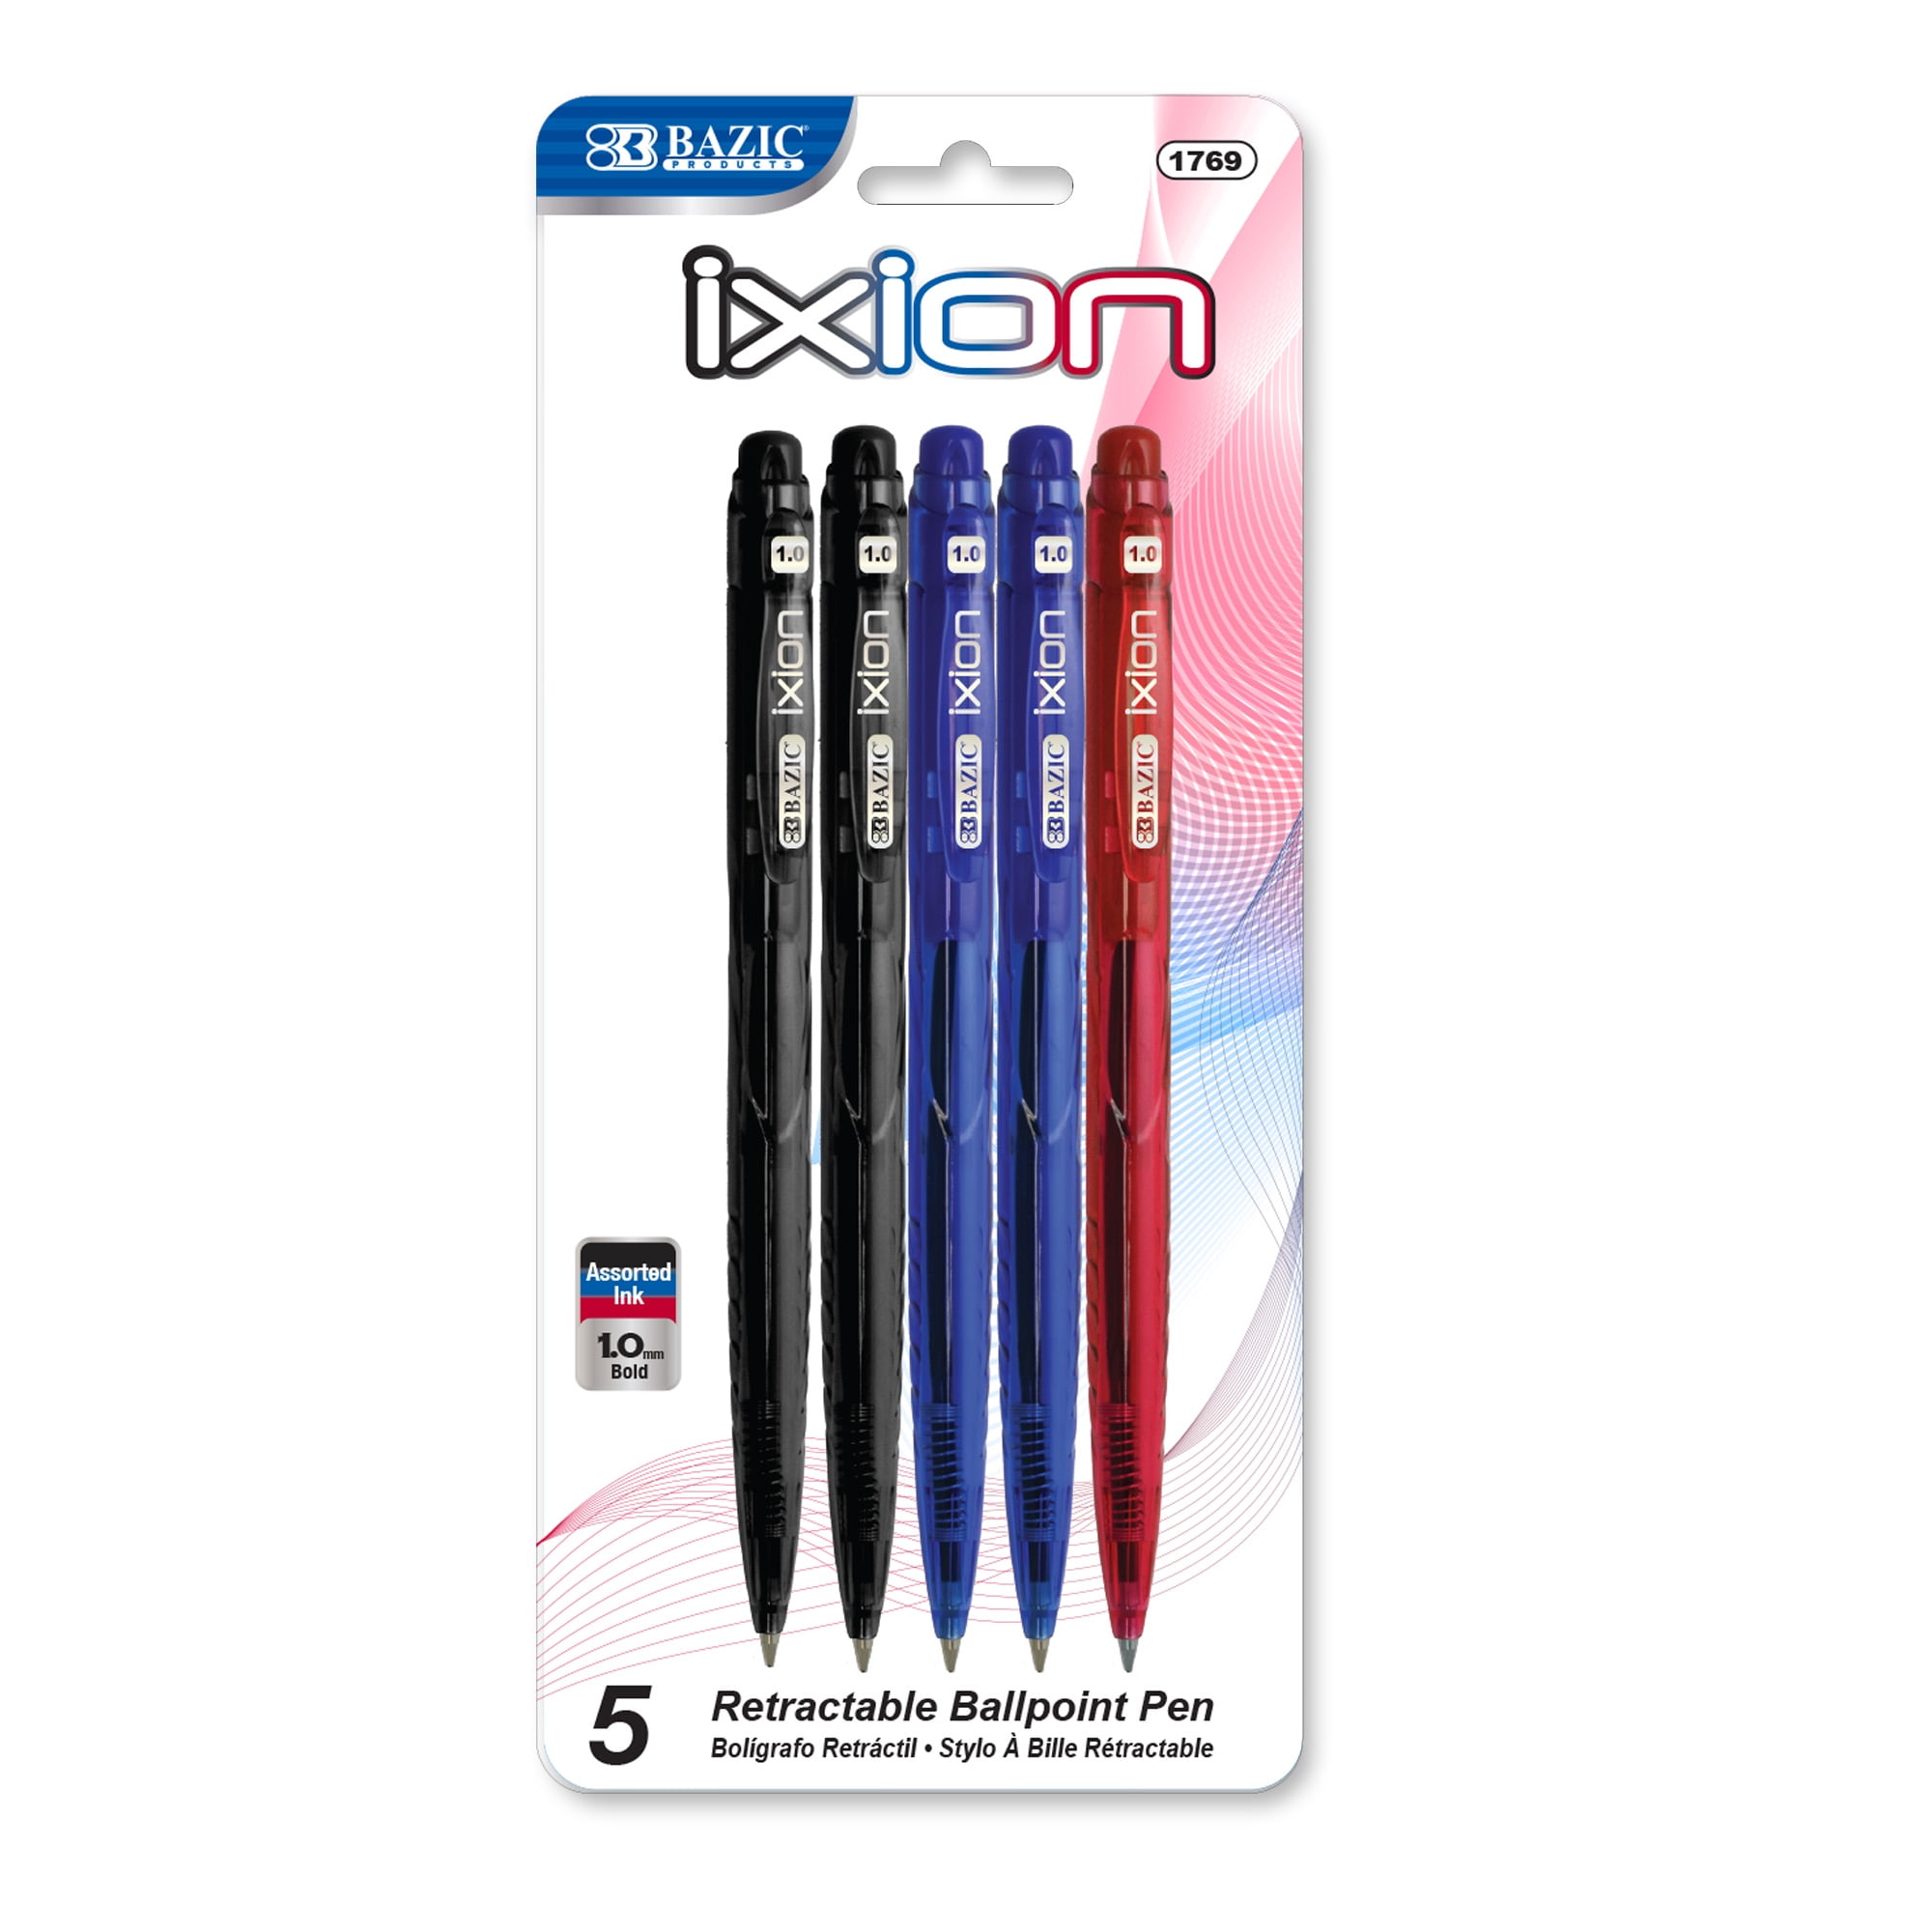 12 Colored Ballpoint Pens, 4-in-1 Retractable gel pens, Cute Mini Cartoon  Pens For kids Women Adults Teens, Multicolor Pens for Office School Home